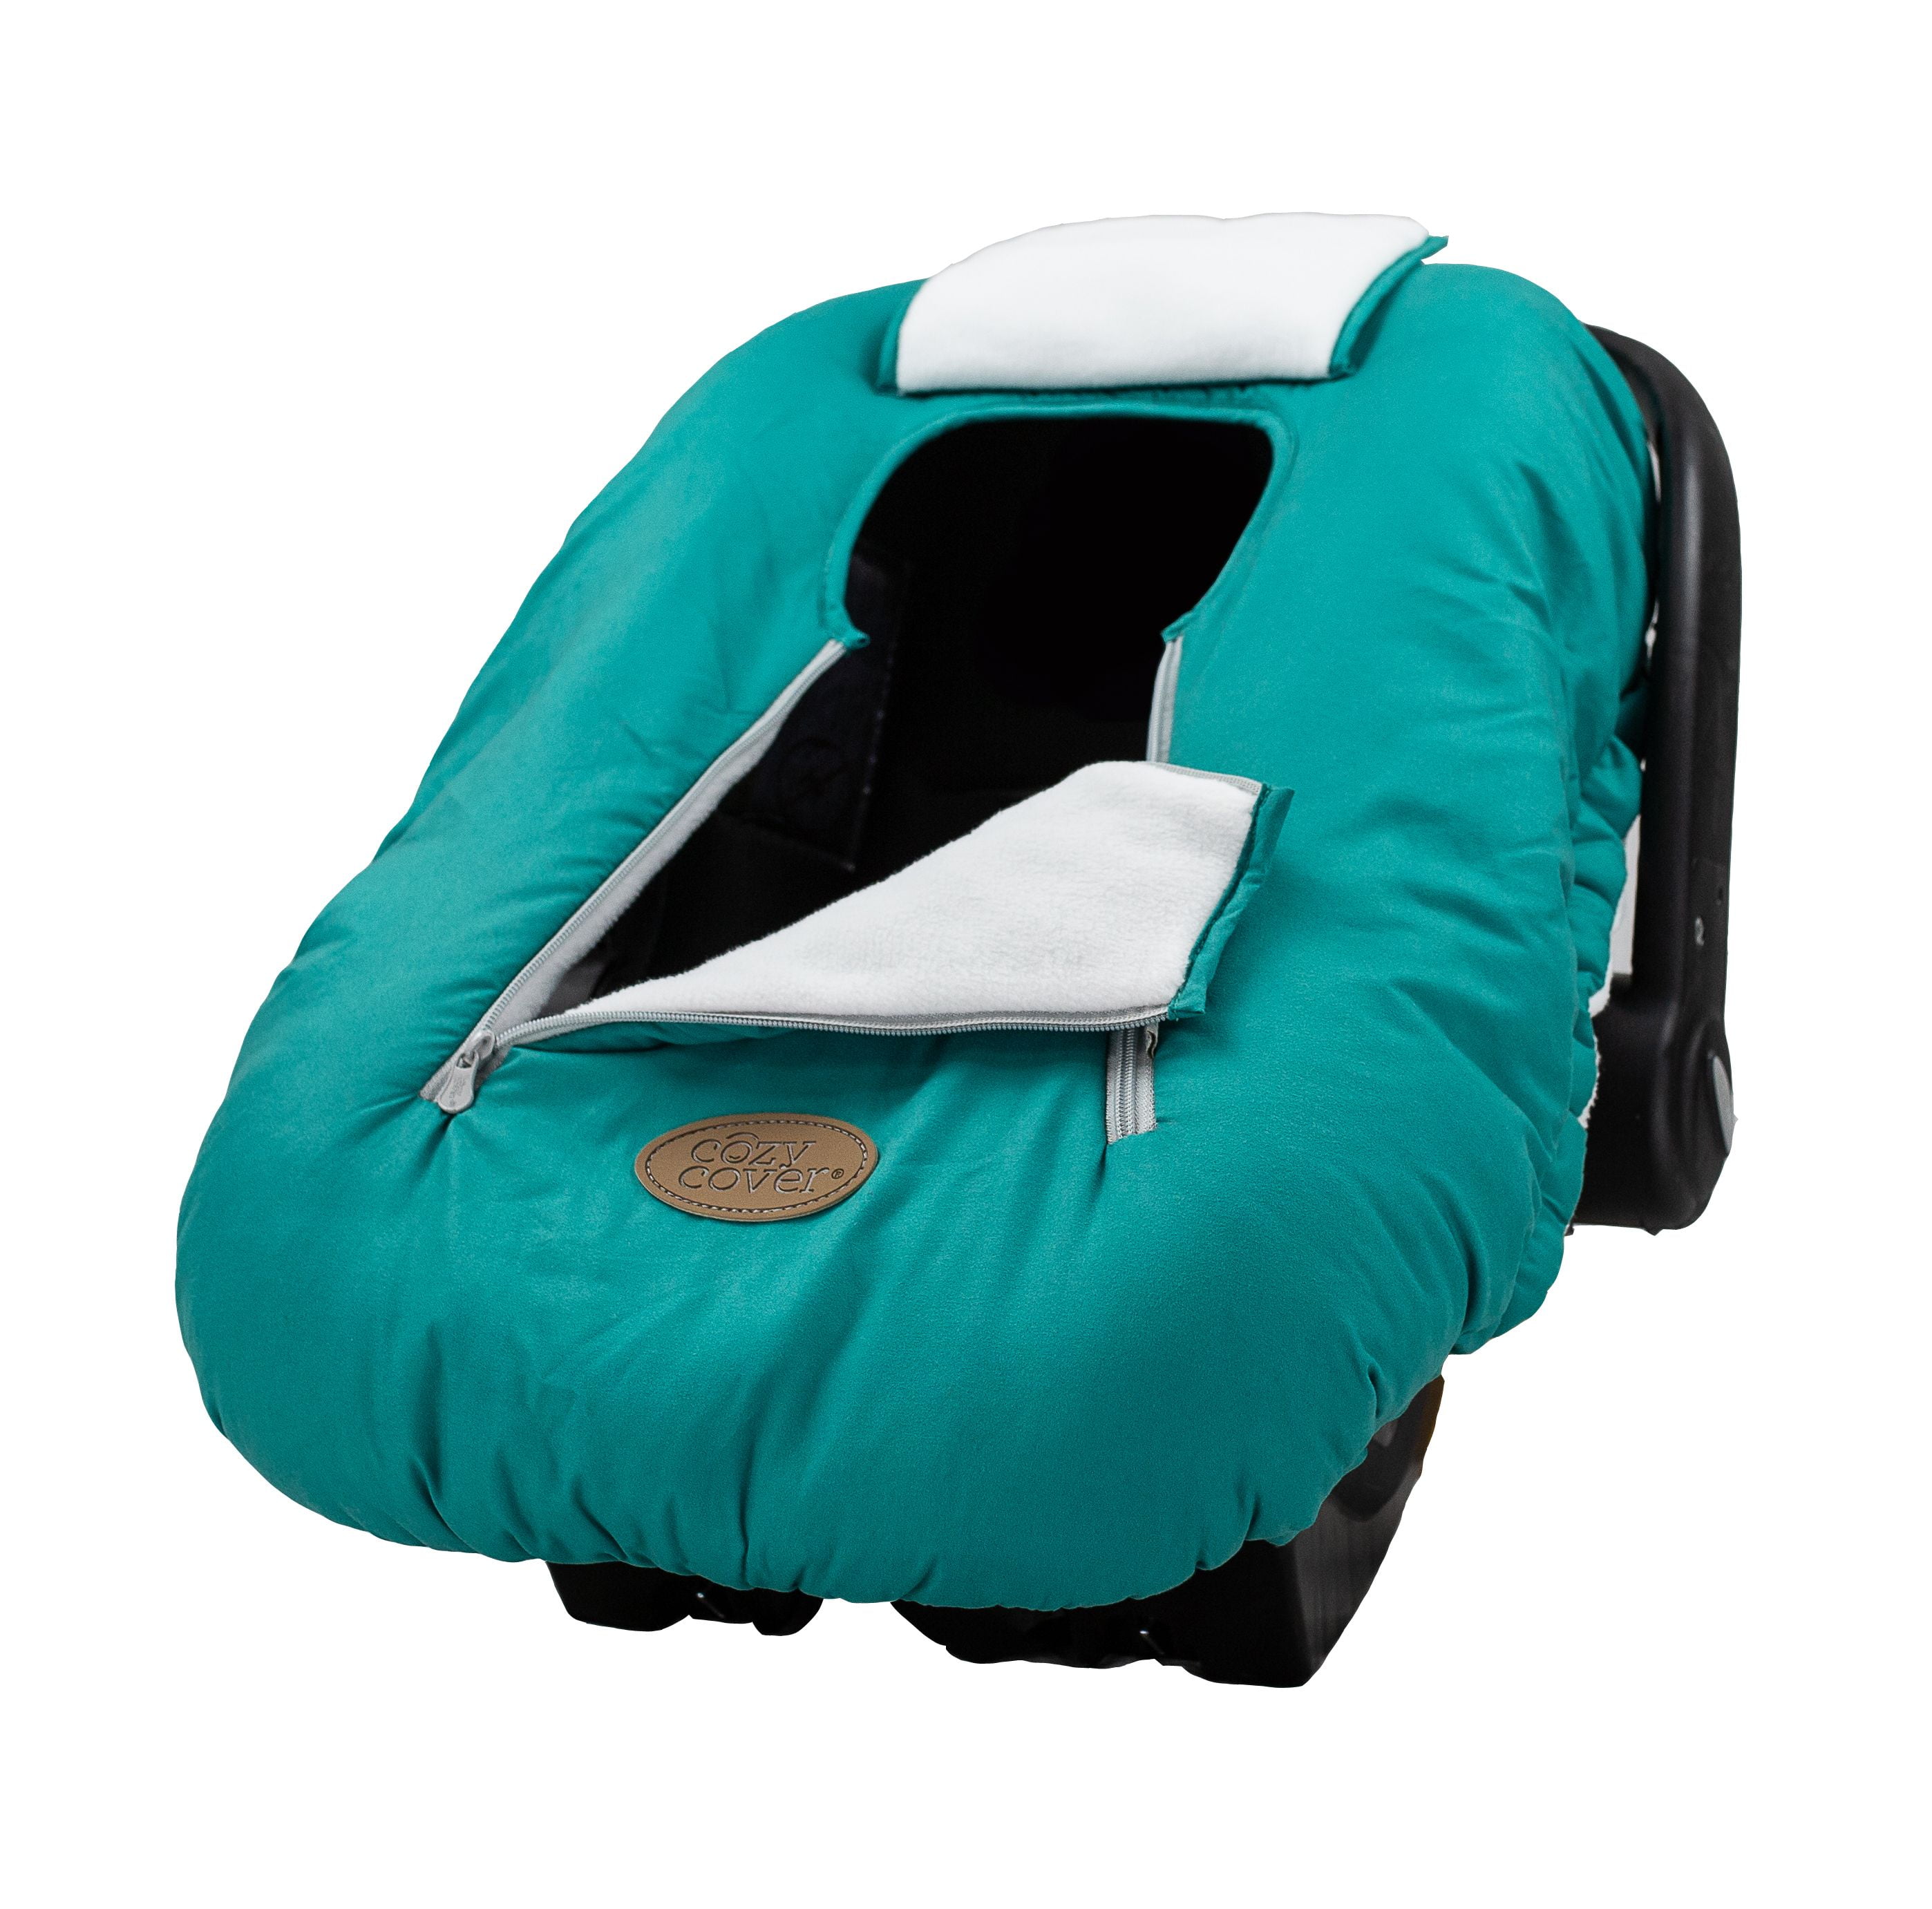 Cozy Cover Infant Carrier Teal Com - Cozy Cover For Baby Car Seat